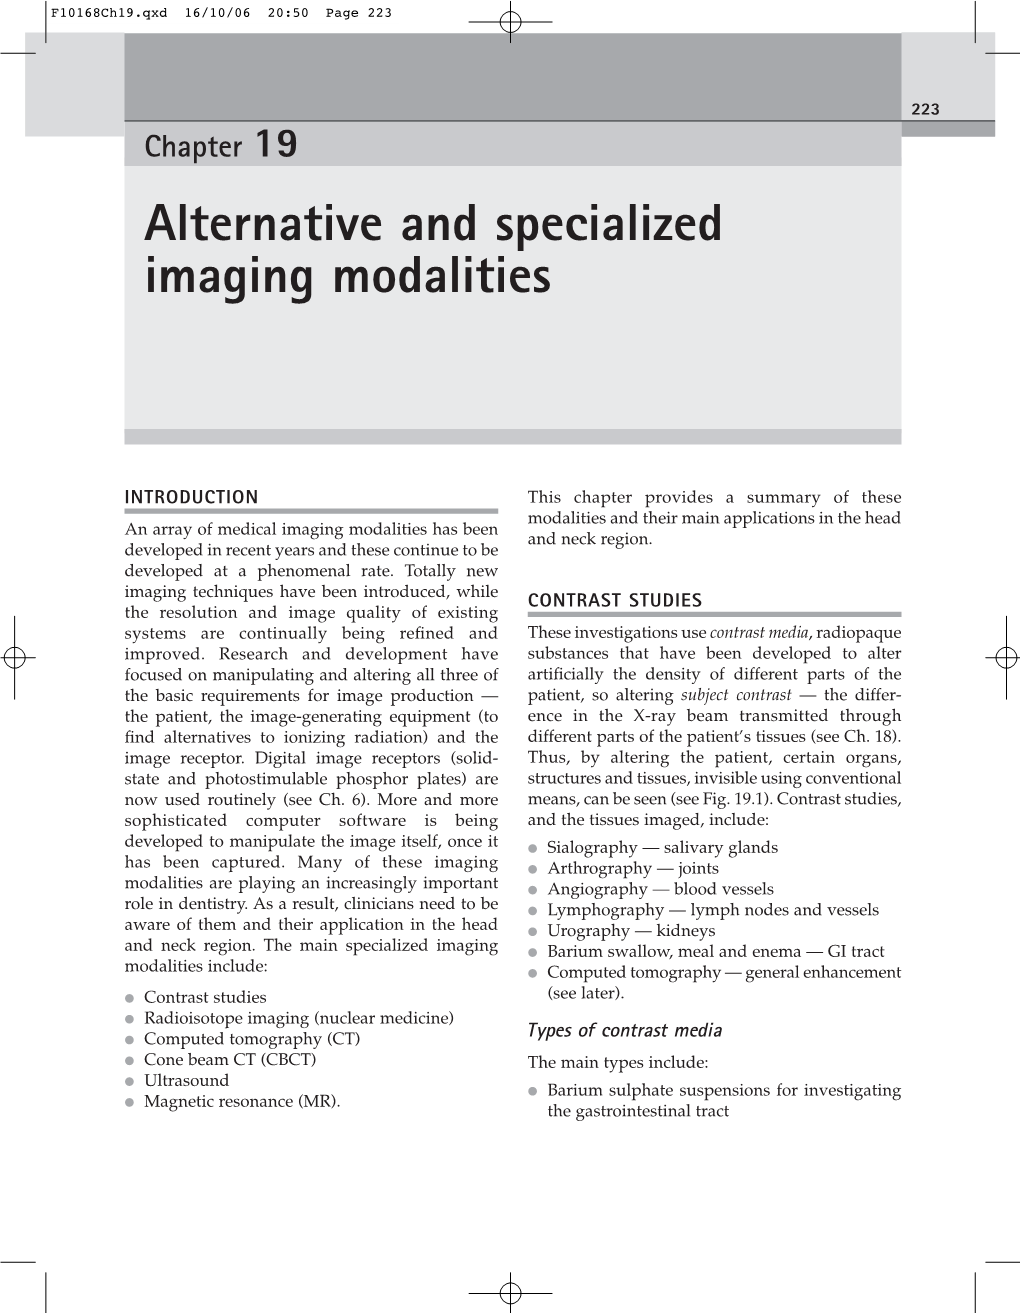 Alternative and Specialized Imaging Modalities